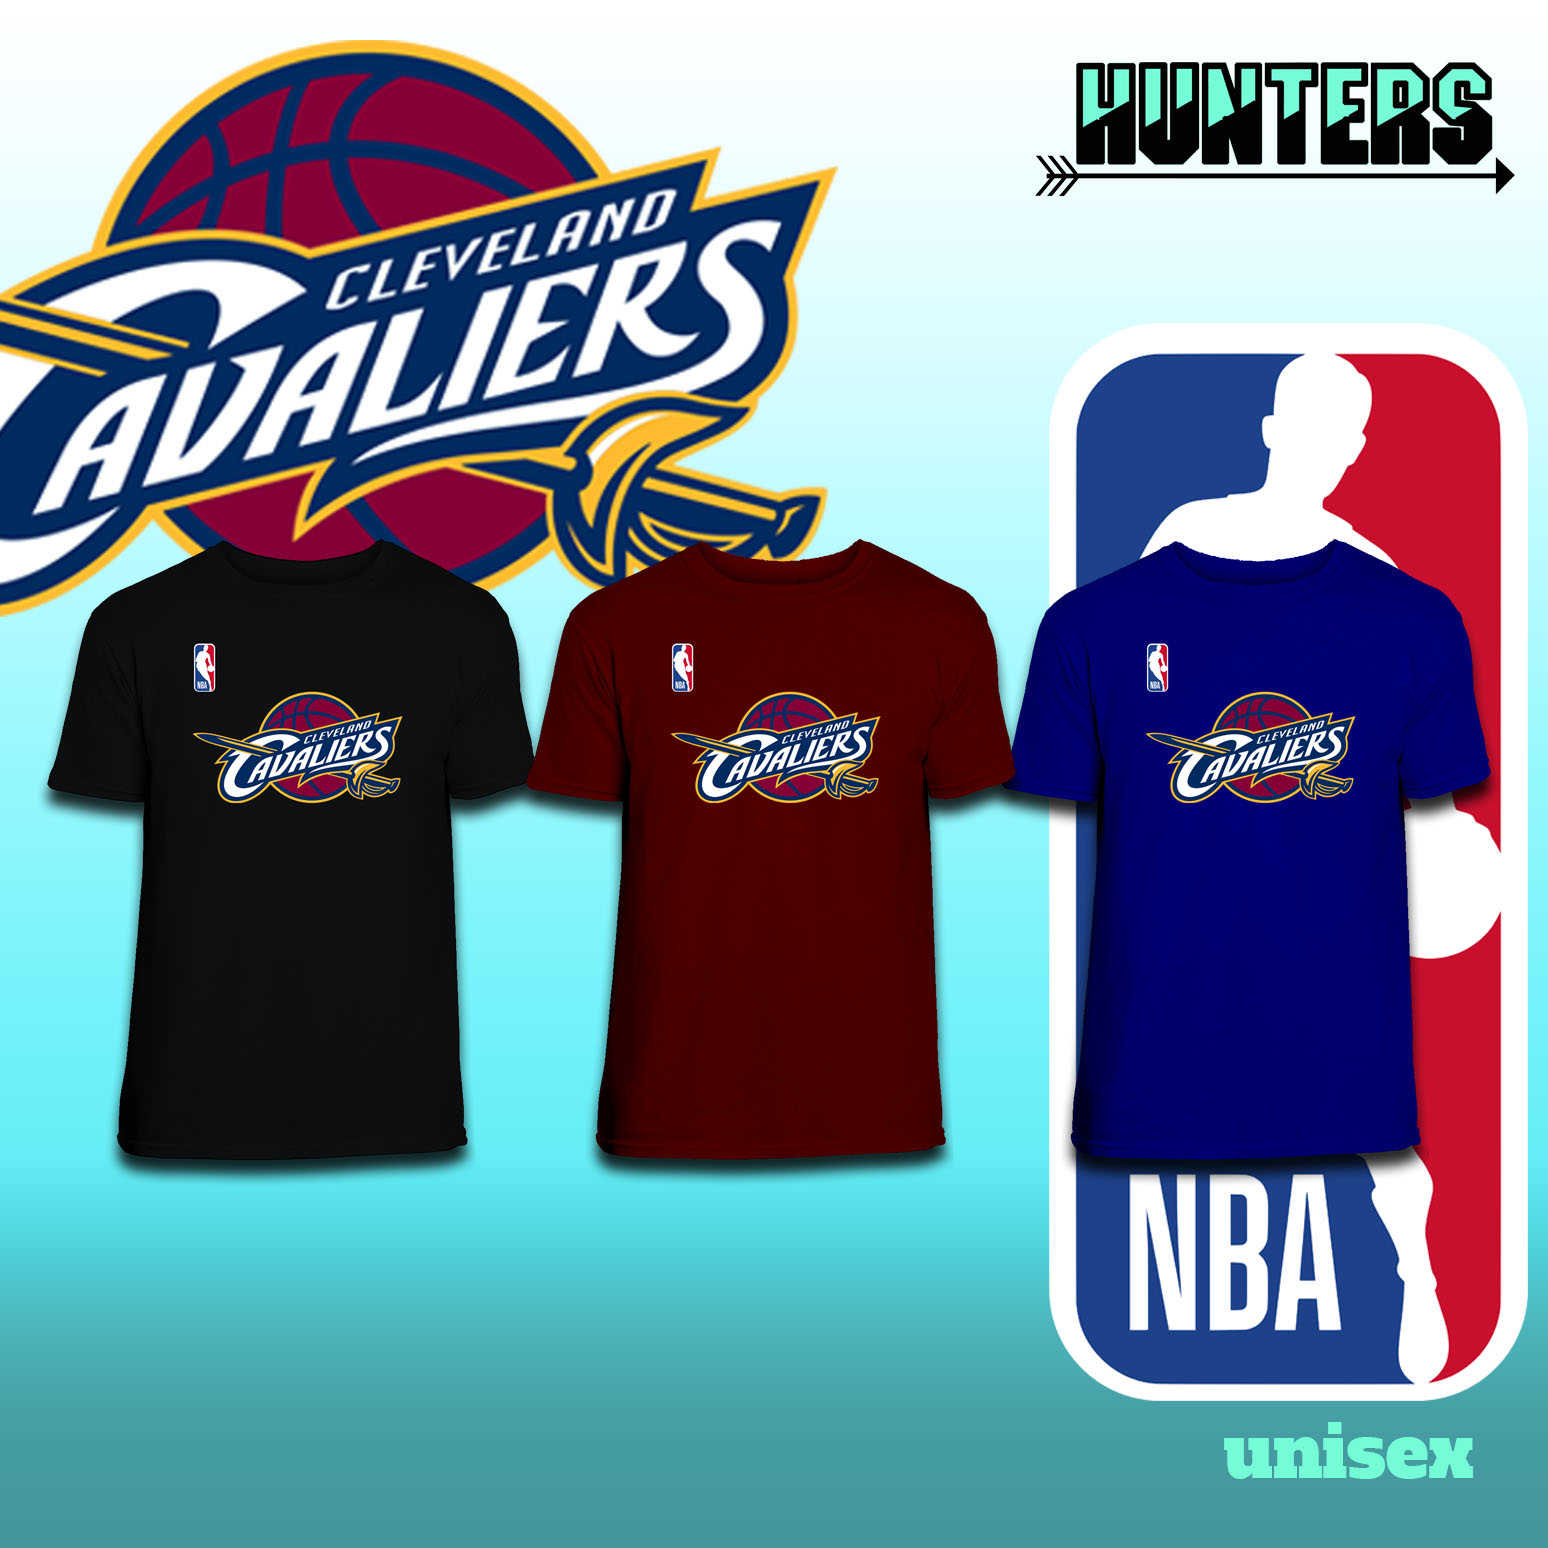 Cleveland Cavaliers All Jerseys and Logos